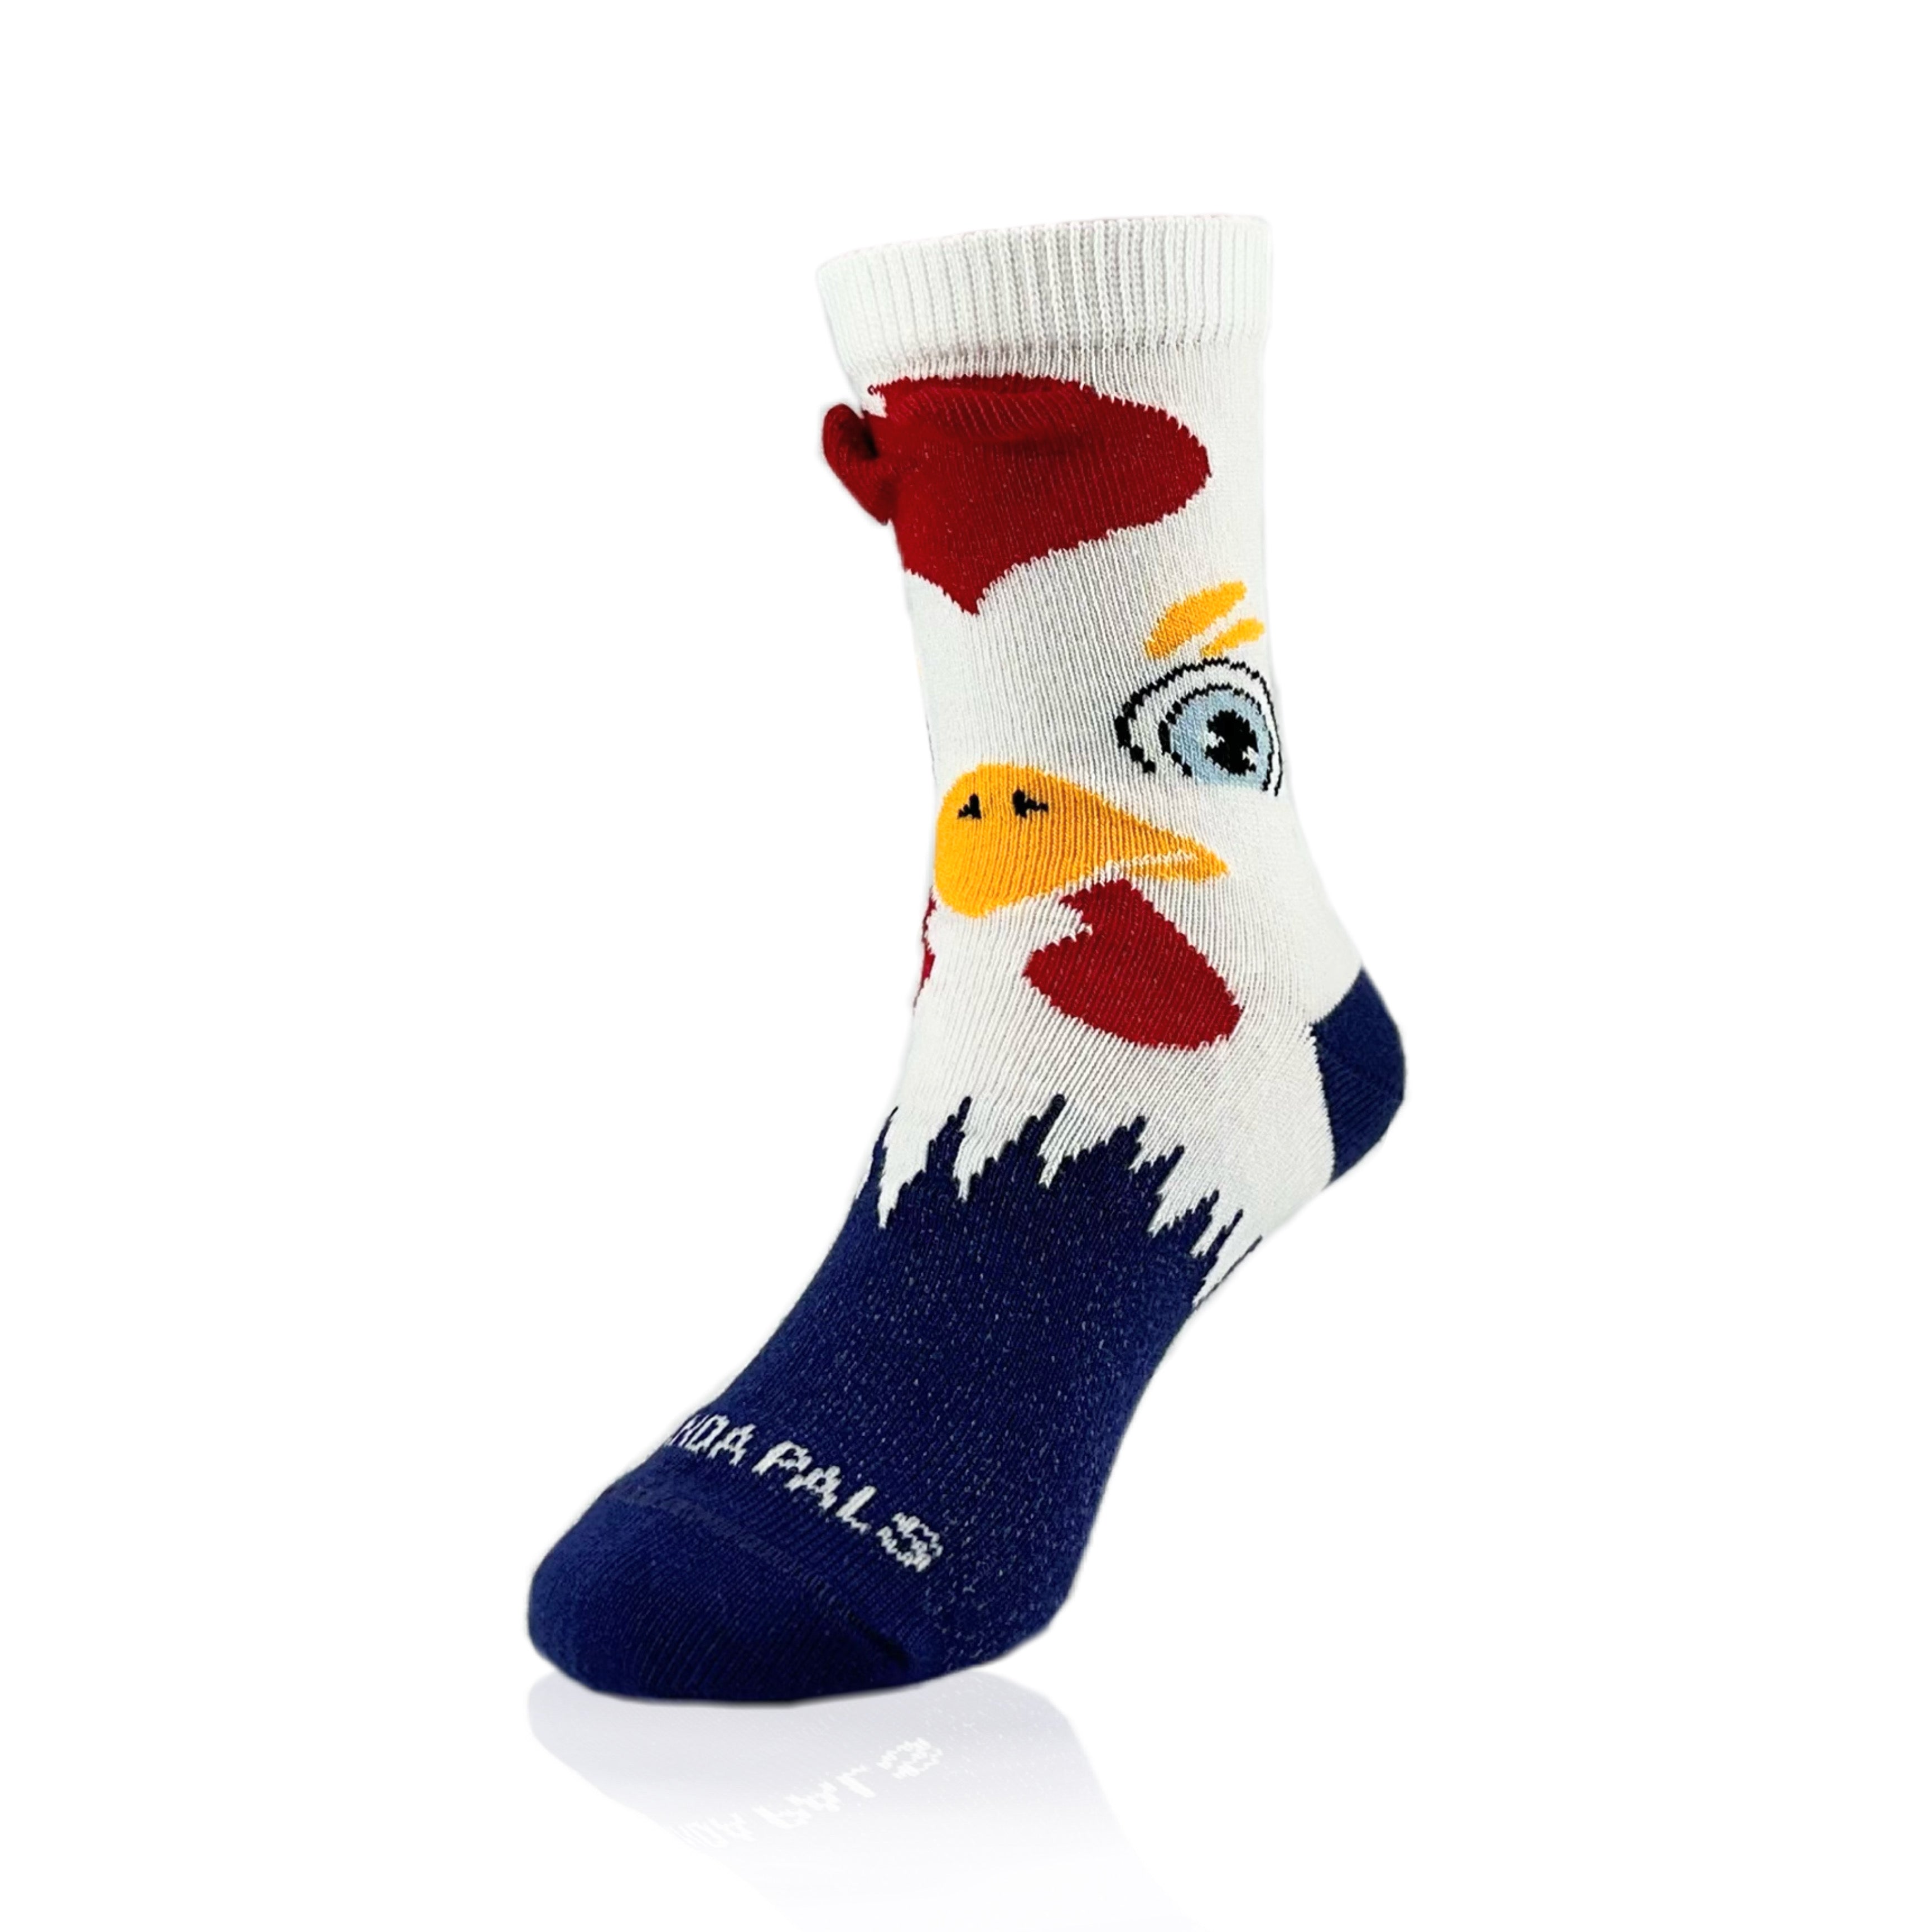 Rooster Socks from the Sock Panda (Age 3-7)